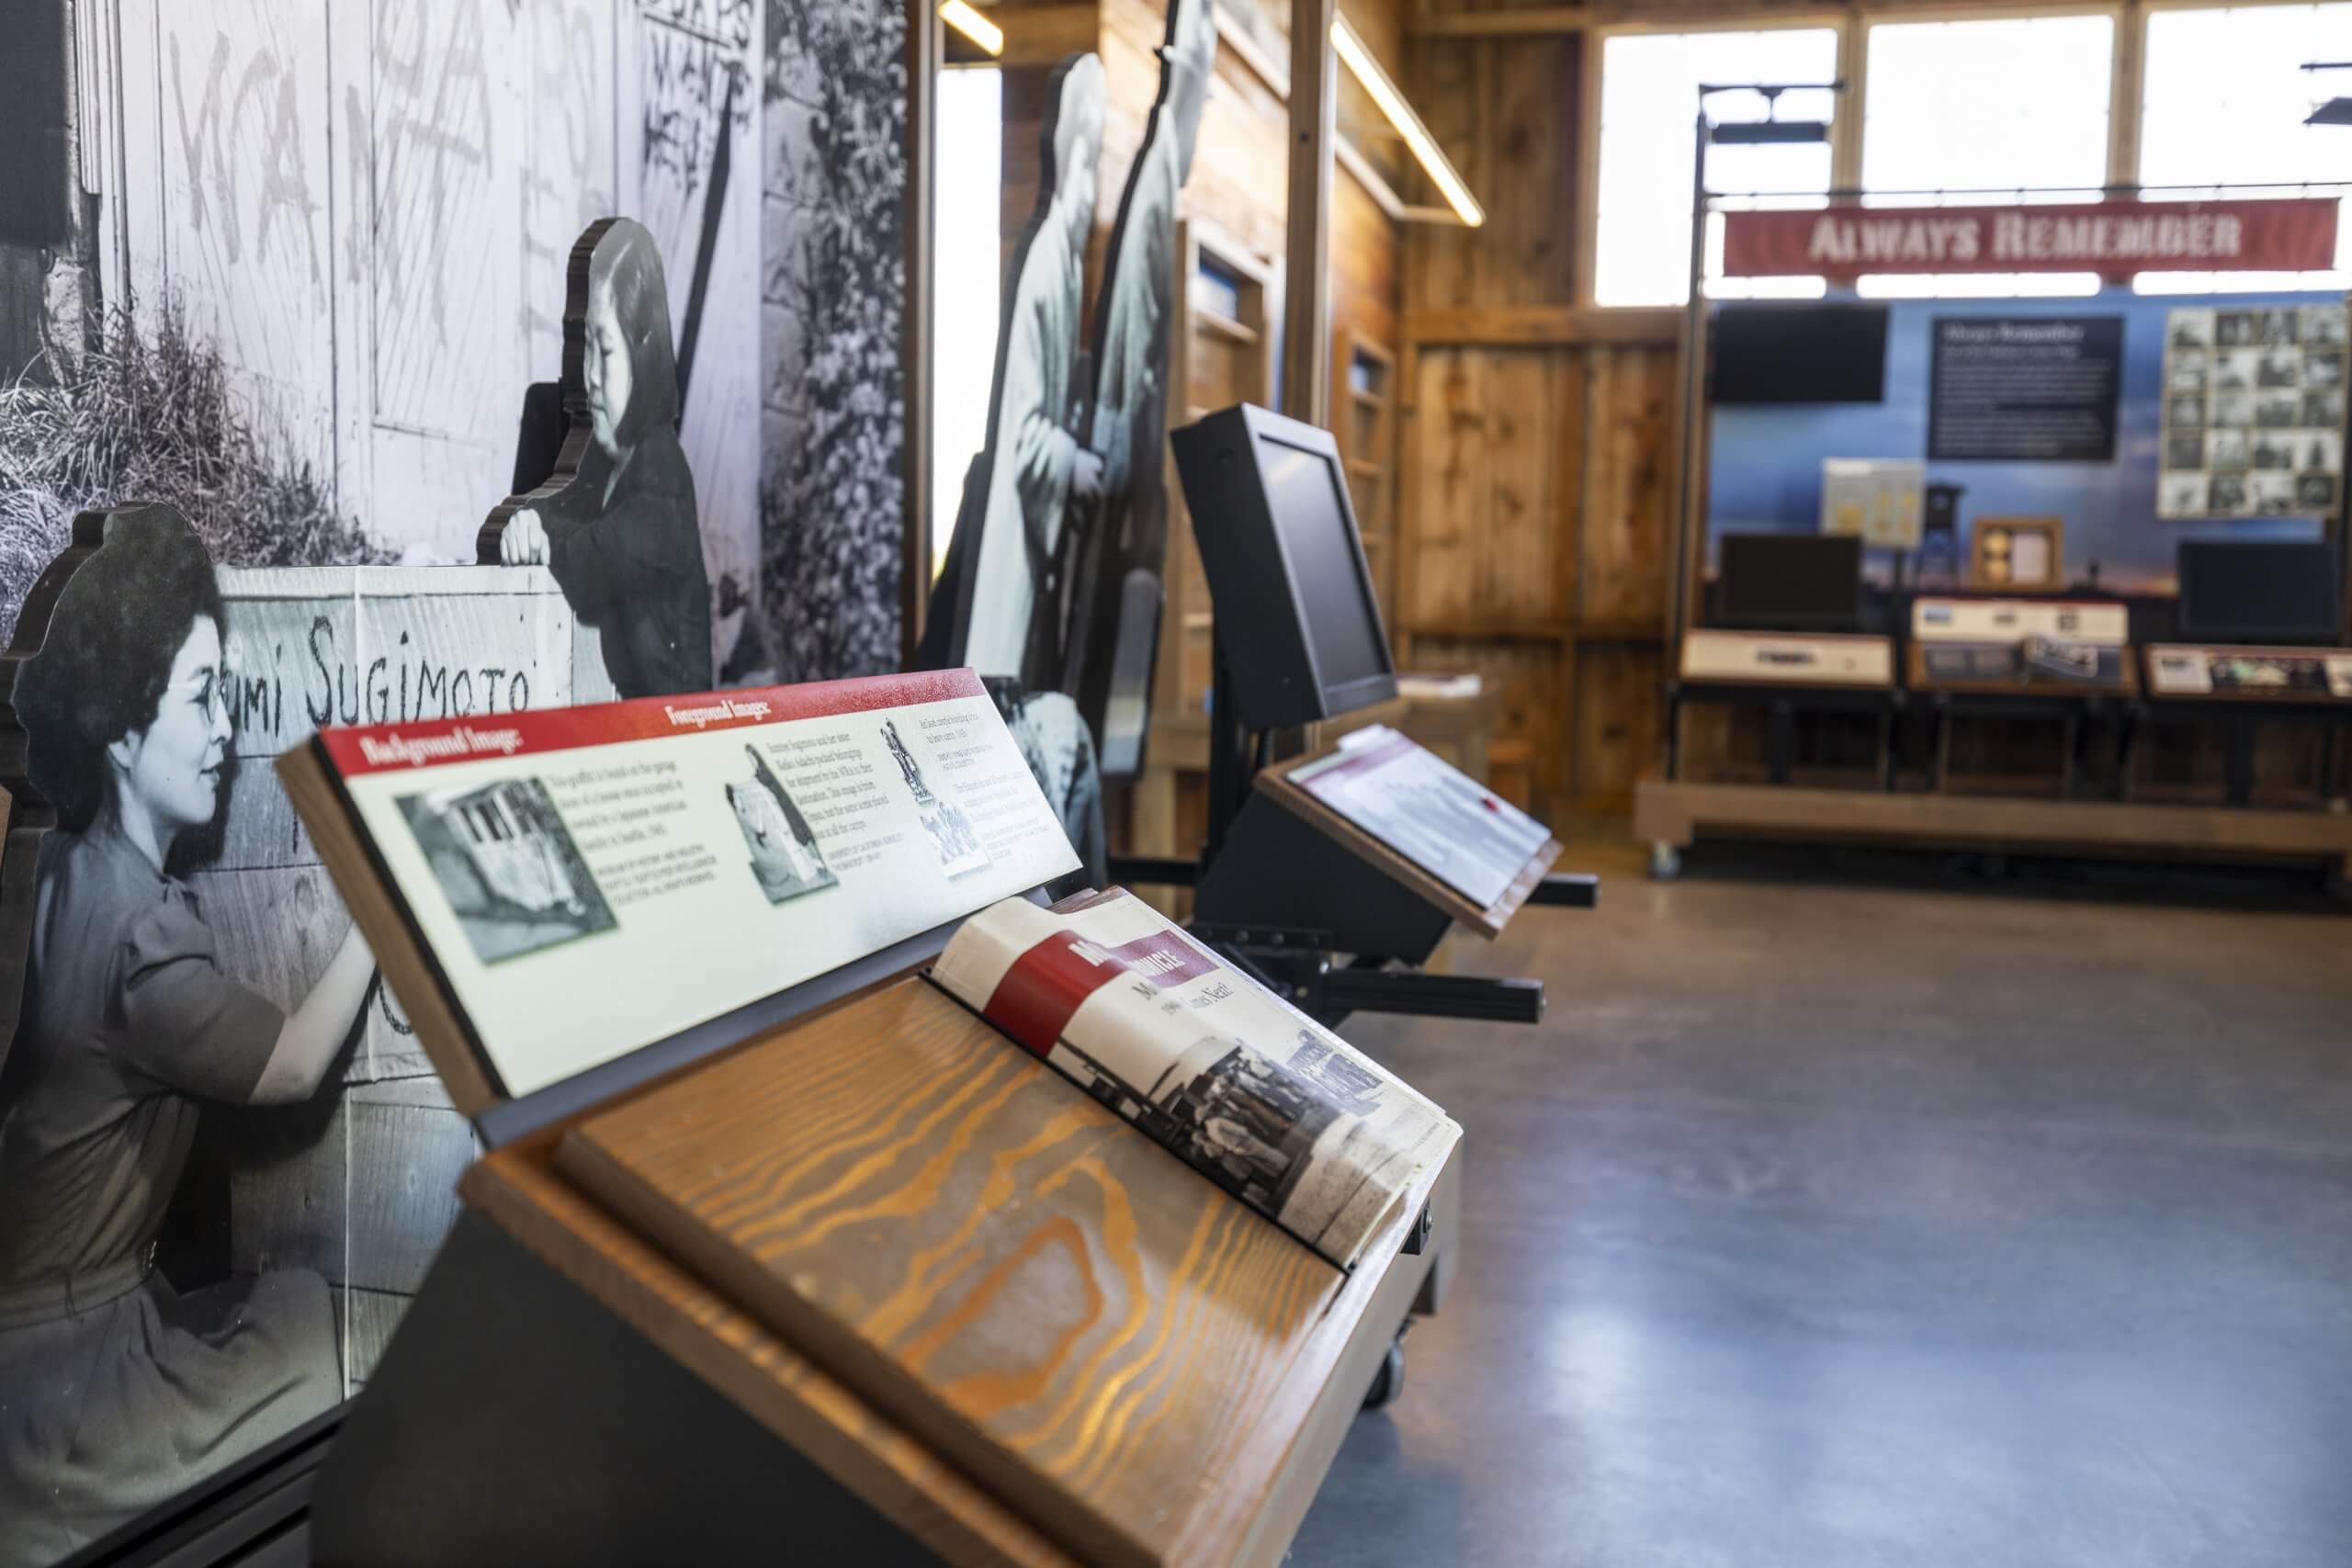 Exhibits inside the visitor center at Minidoka National Historic Site.